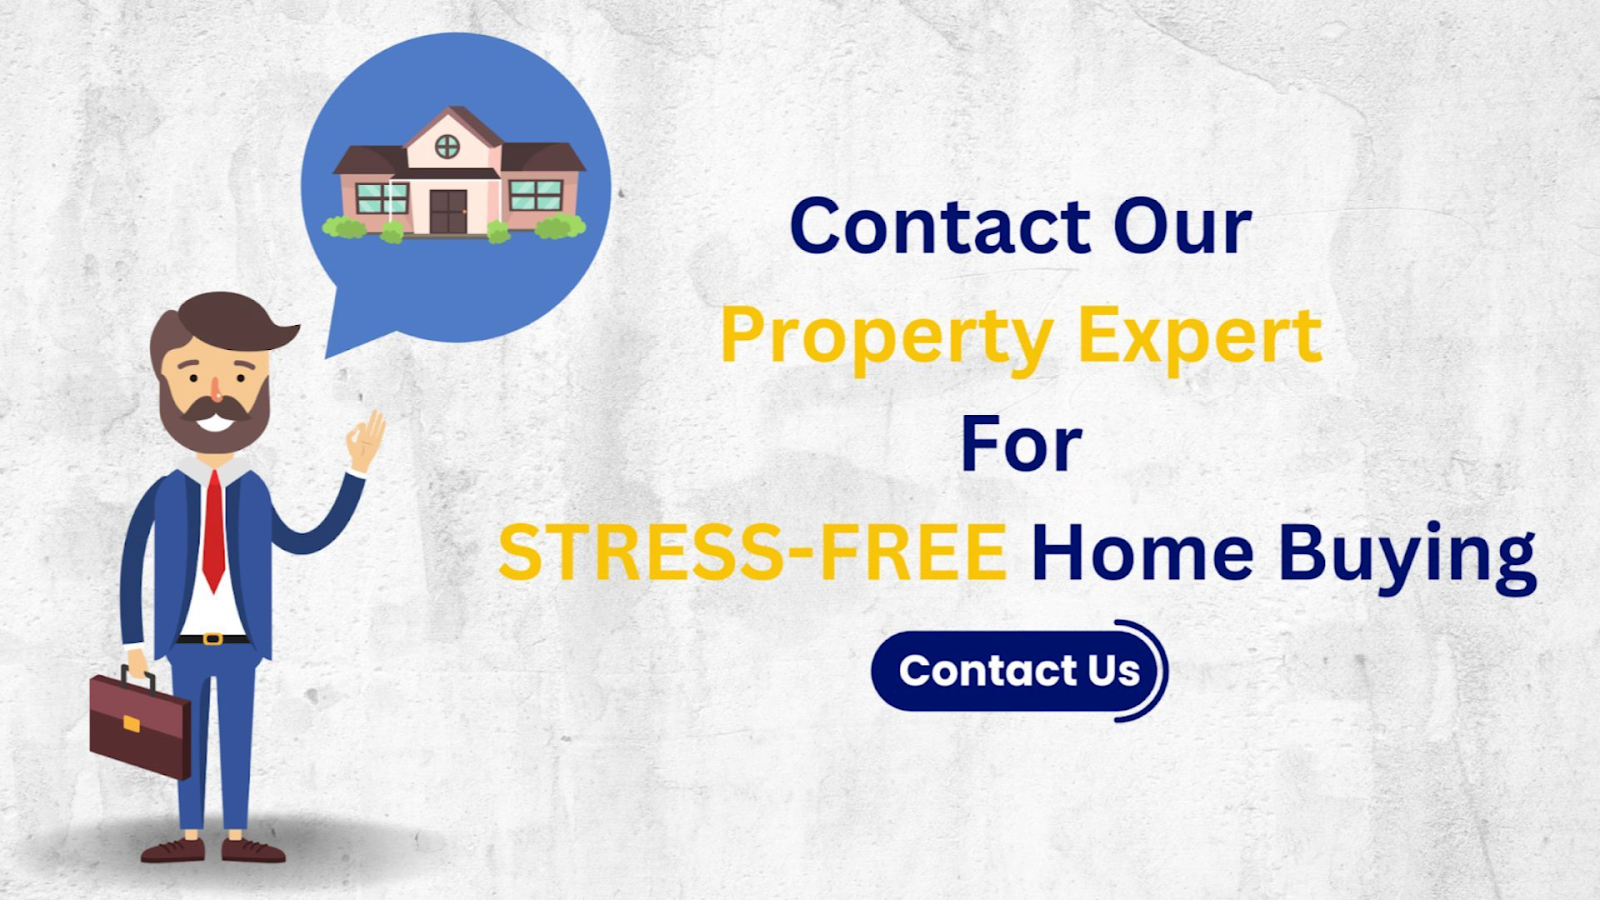 Contact PropertyCloud real estate experts to get the best guidance related to property buying or selling.